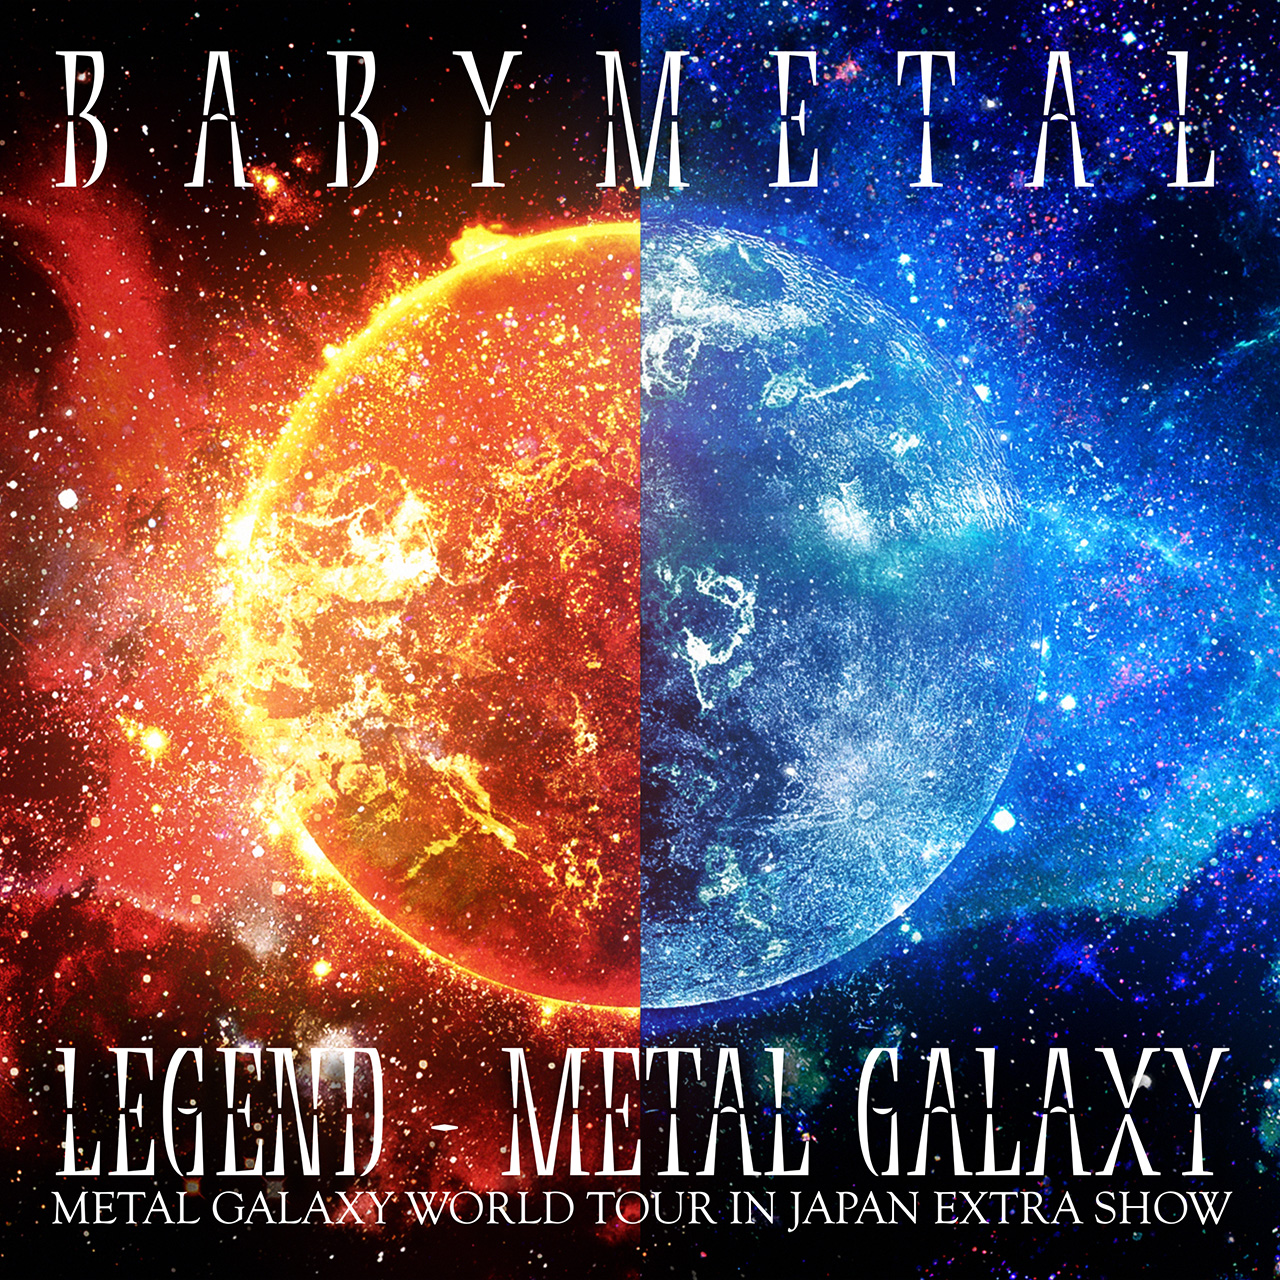 LEGEND – METAL GALAXY Blu-ray, DVD, CD Audio, And THE ONE 